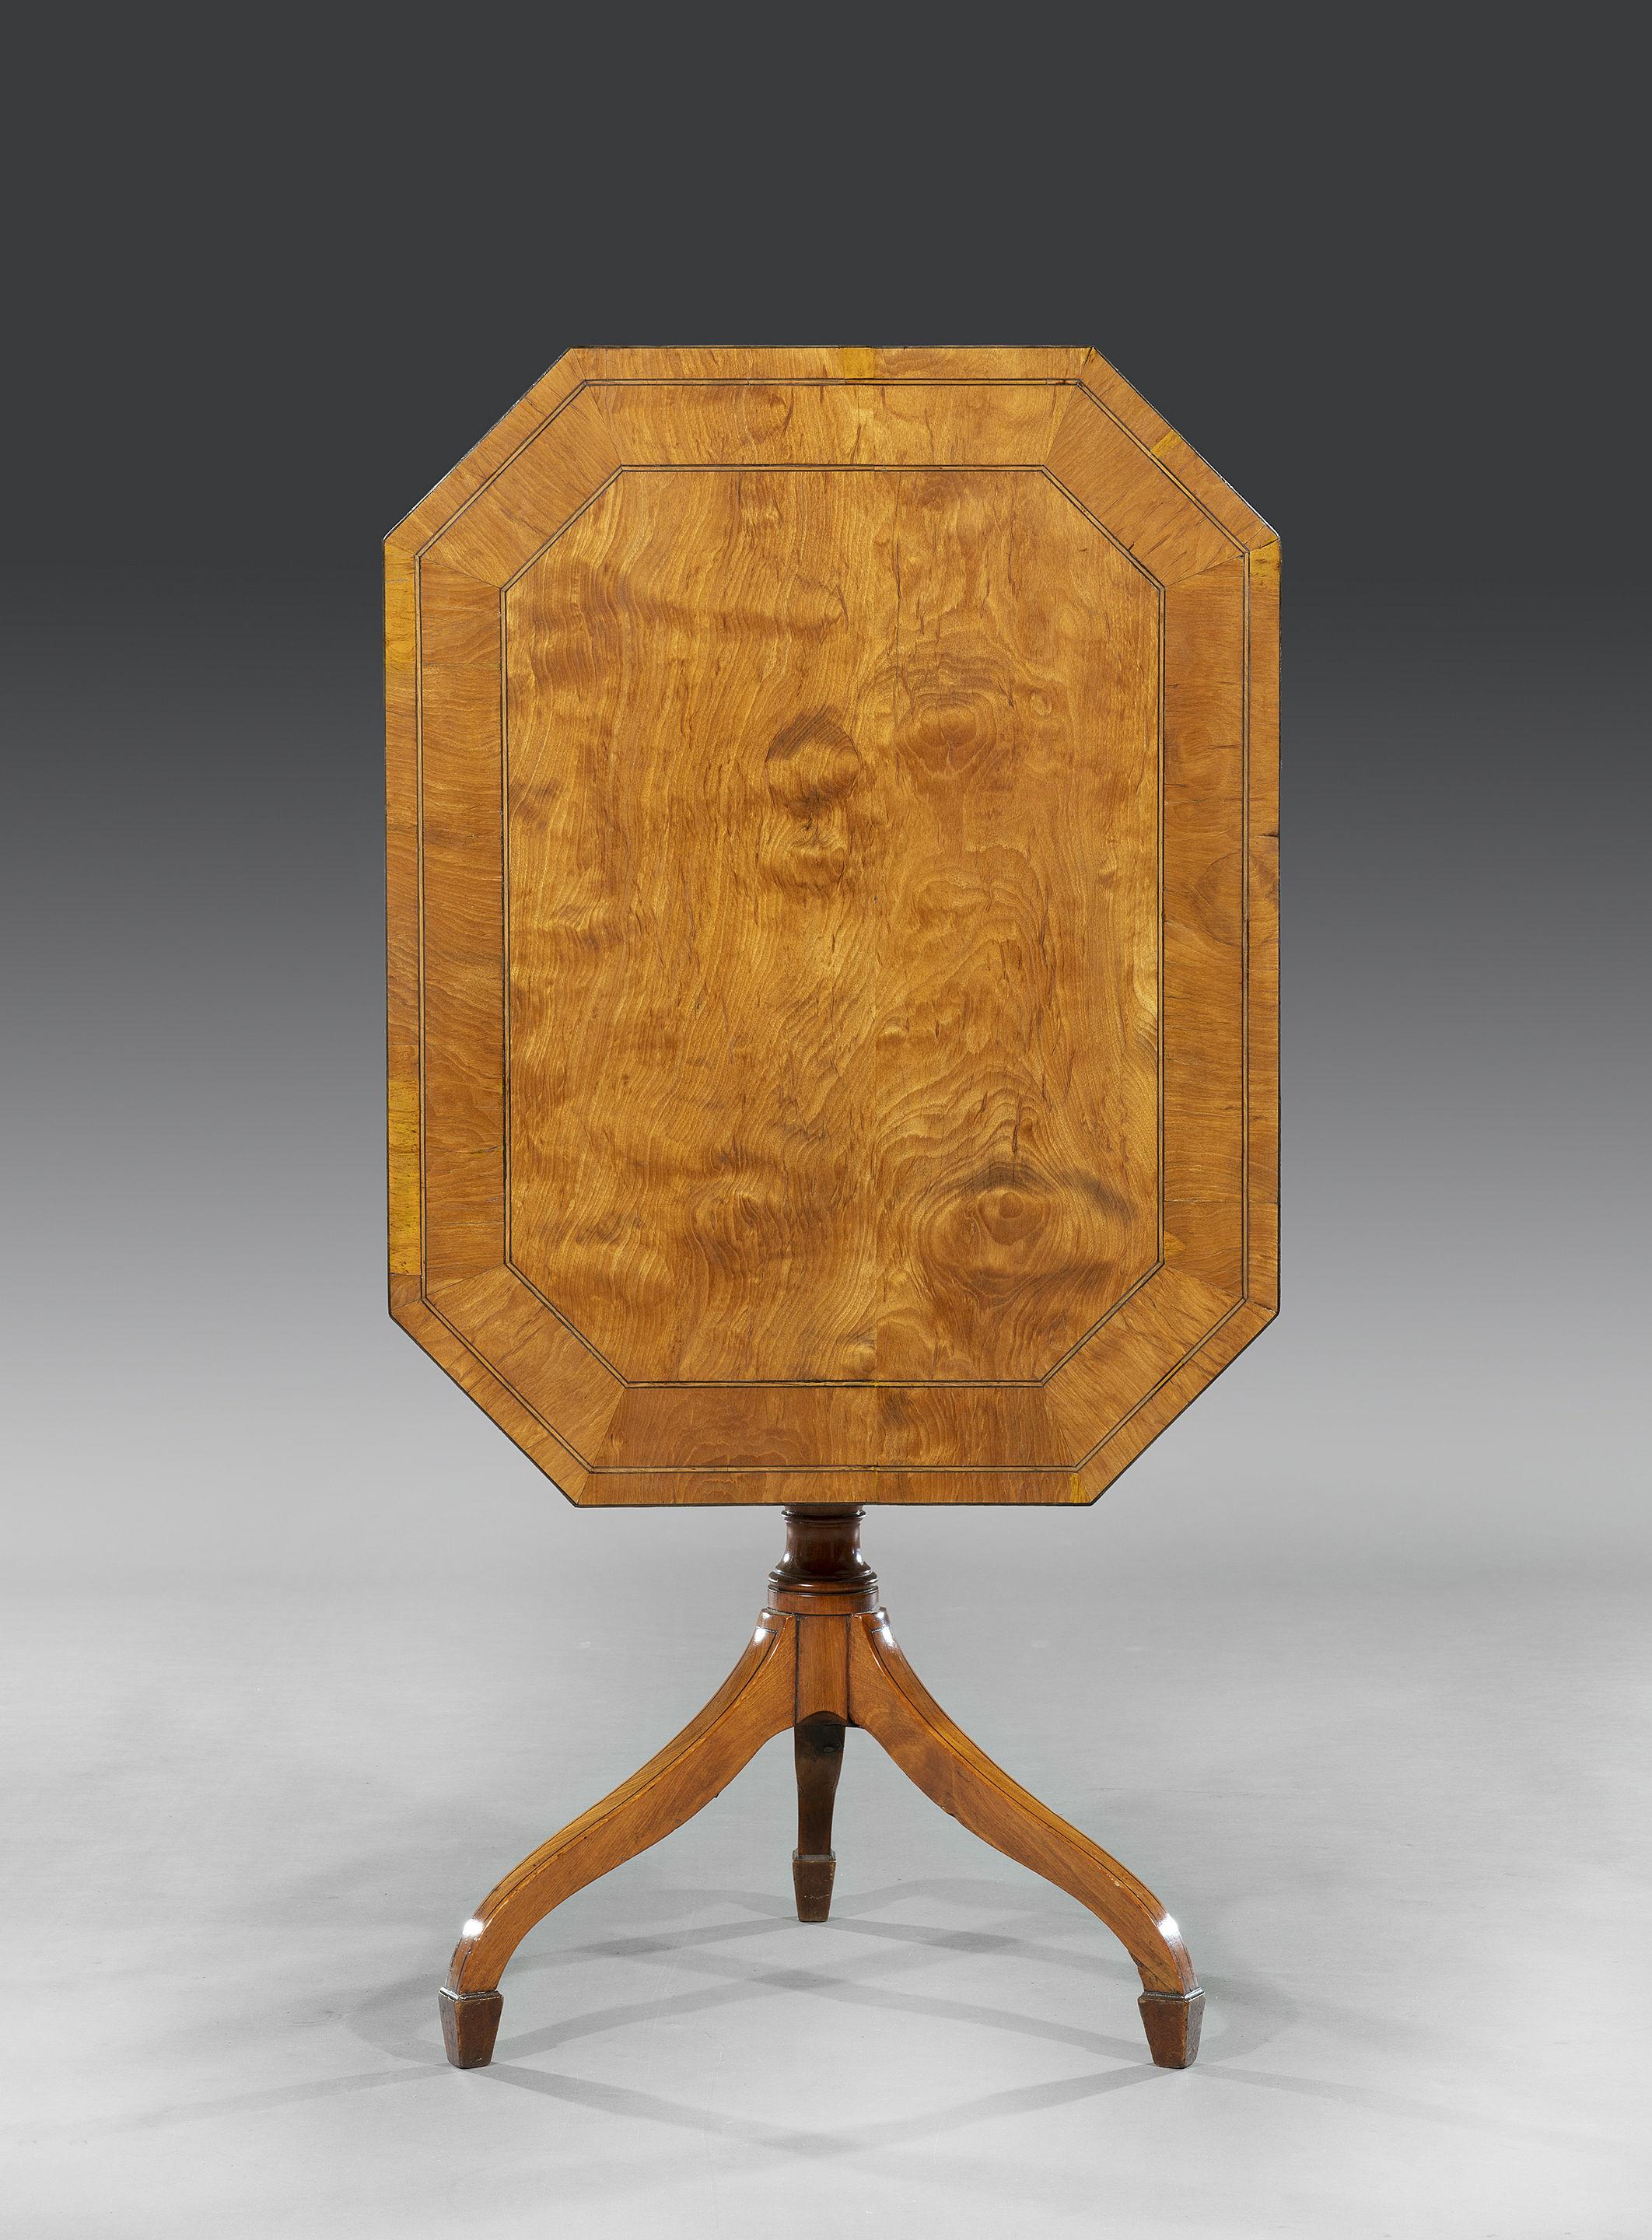 The octagonal shape tilt-top table with West Indian satinwood veneers is cross-banded in satinwood with ebony stringing and satinwood banding and sits on a solid satinwood turned pedestal base on splayed ebony strung legs that terminate on block